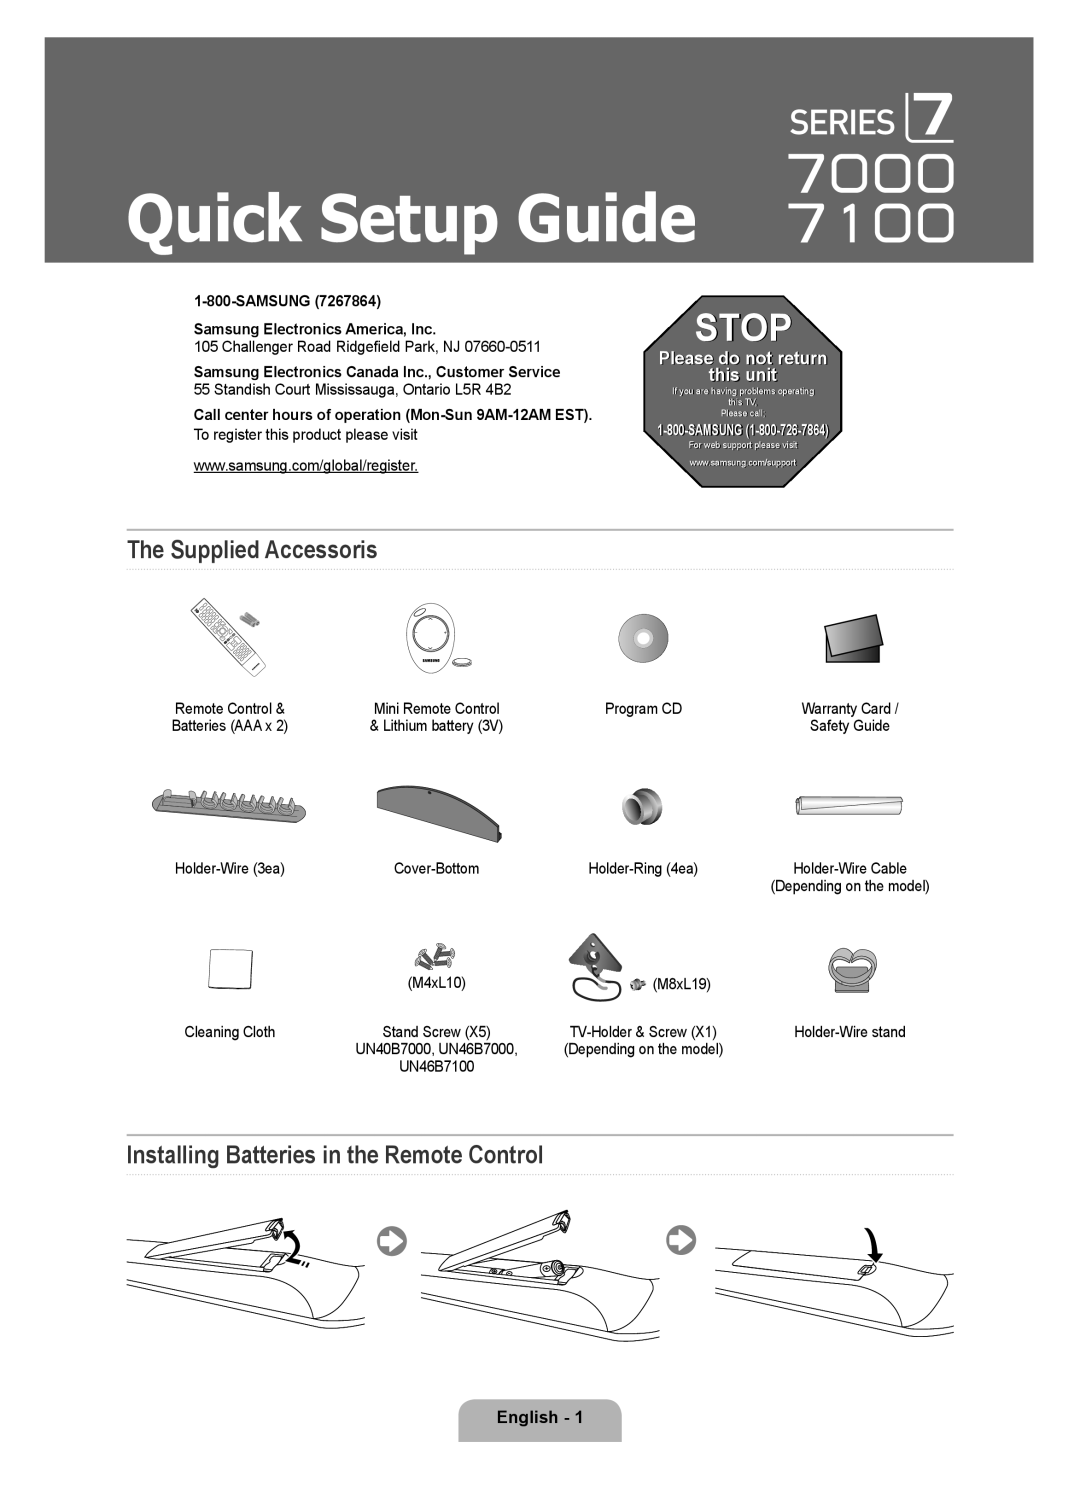 Samsung 7000 setup guide Stop, The Supplied Accessoris, Installing Batteries in the Remote Control, English, Samsung 